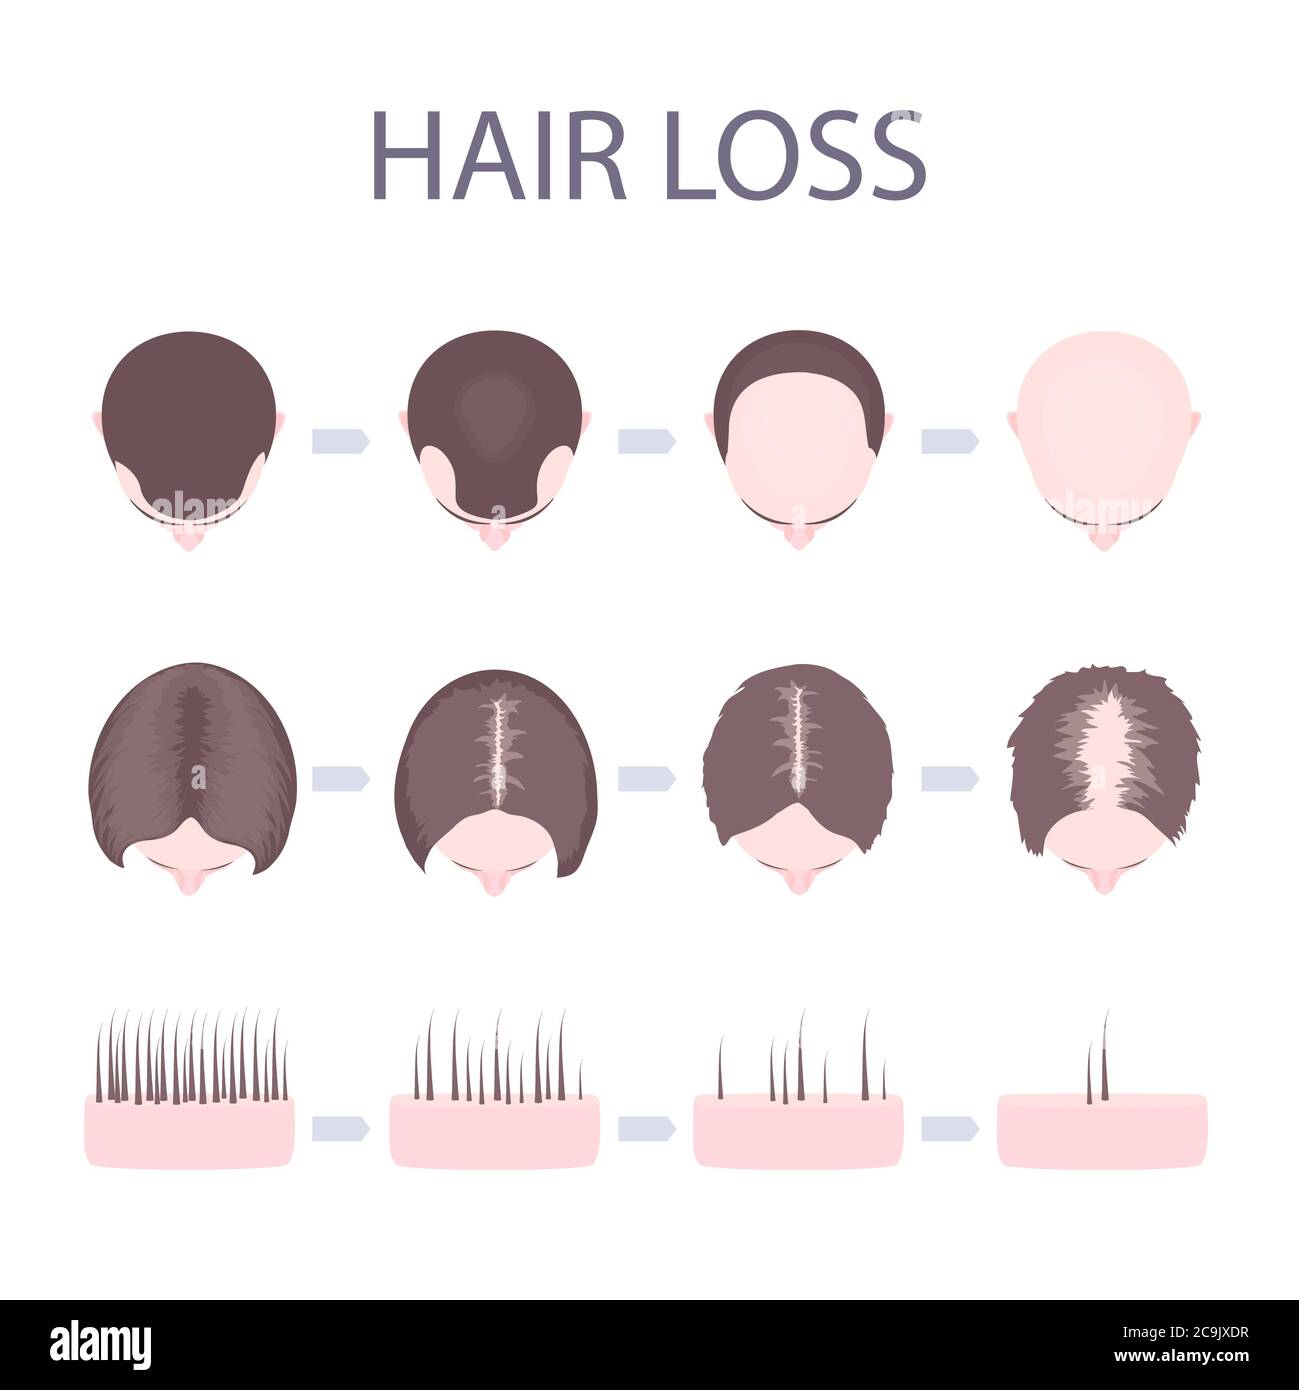 Male and female hair loss stages, illustration. Stock Photo